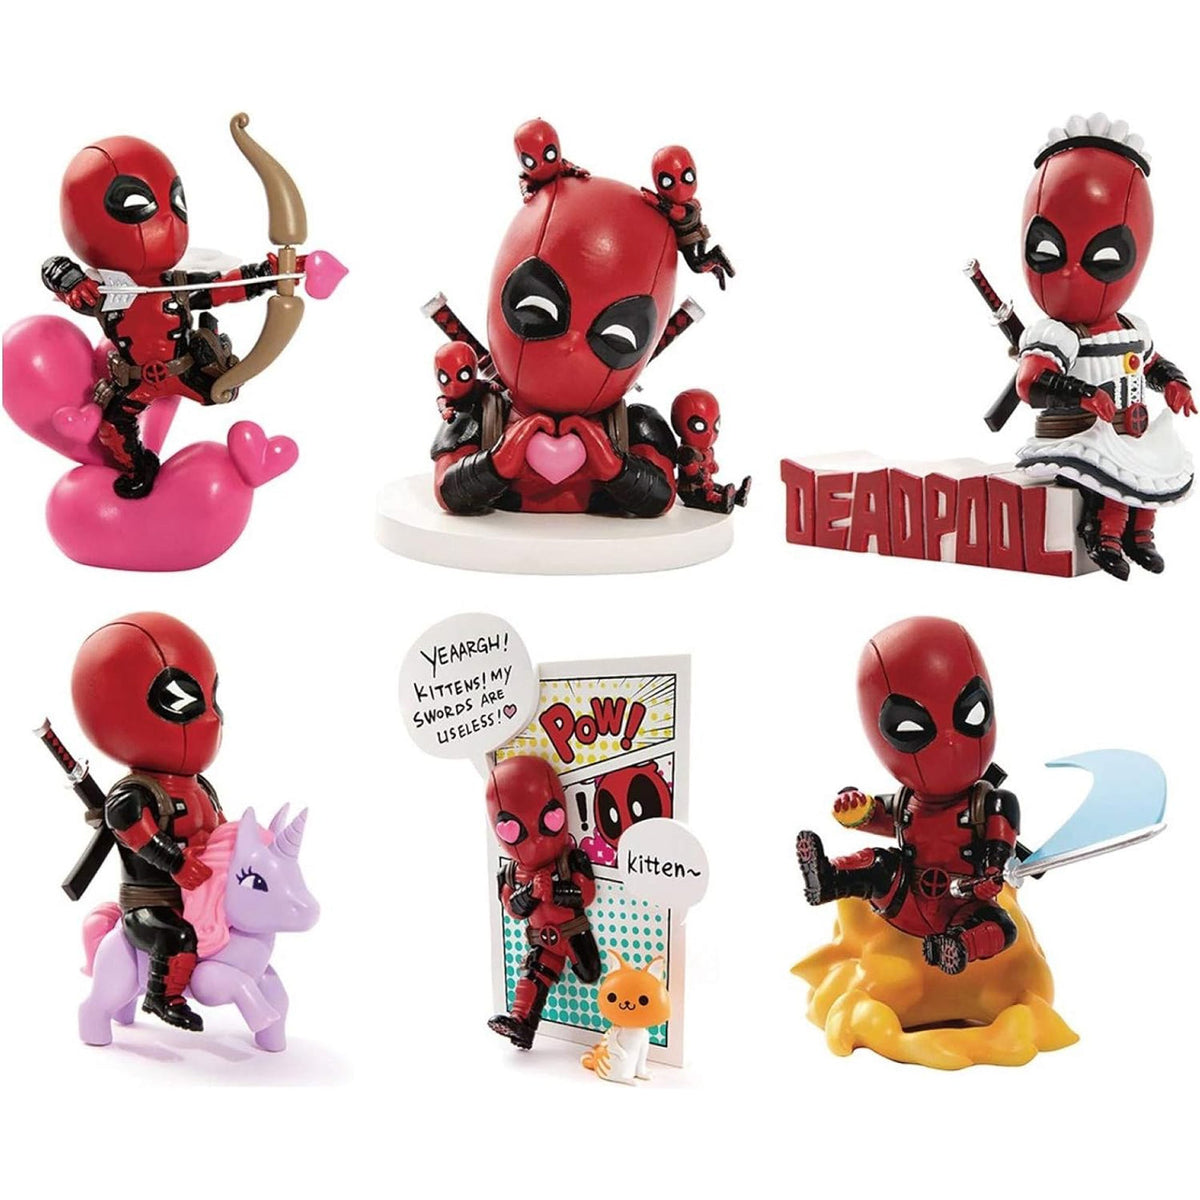 RED PLANET GROUP Impulse Buying Deadpool Surprise Box, Classic Series, 1 Count